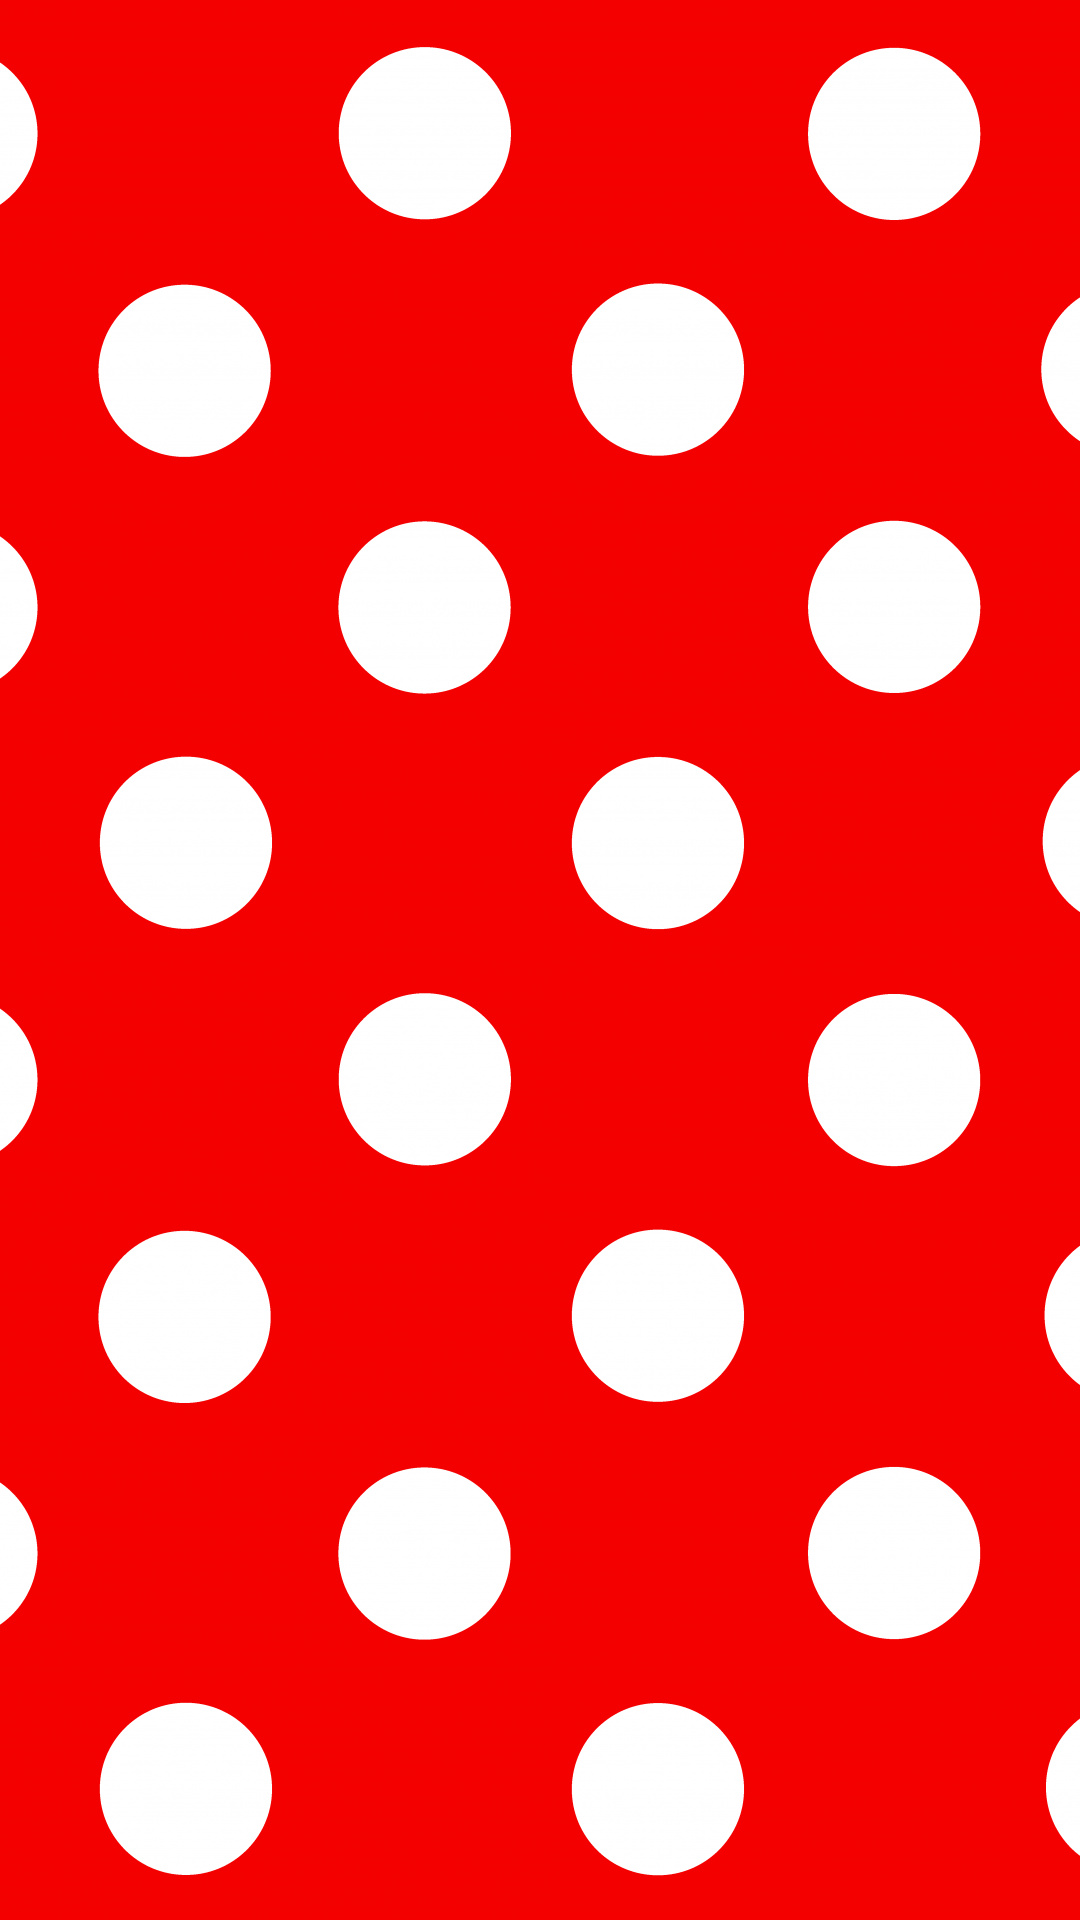 Polka Dot, Red and white theme, Classic and timeless, Elegant simplicity, 1080x1920 Full HD Phone